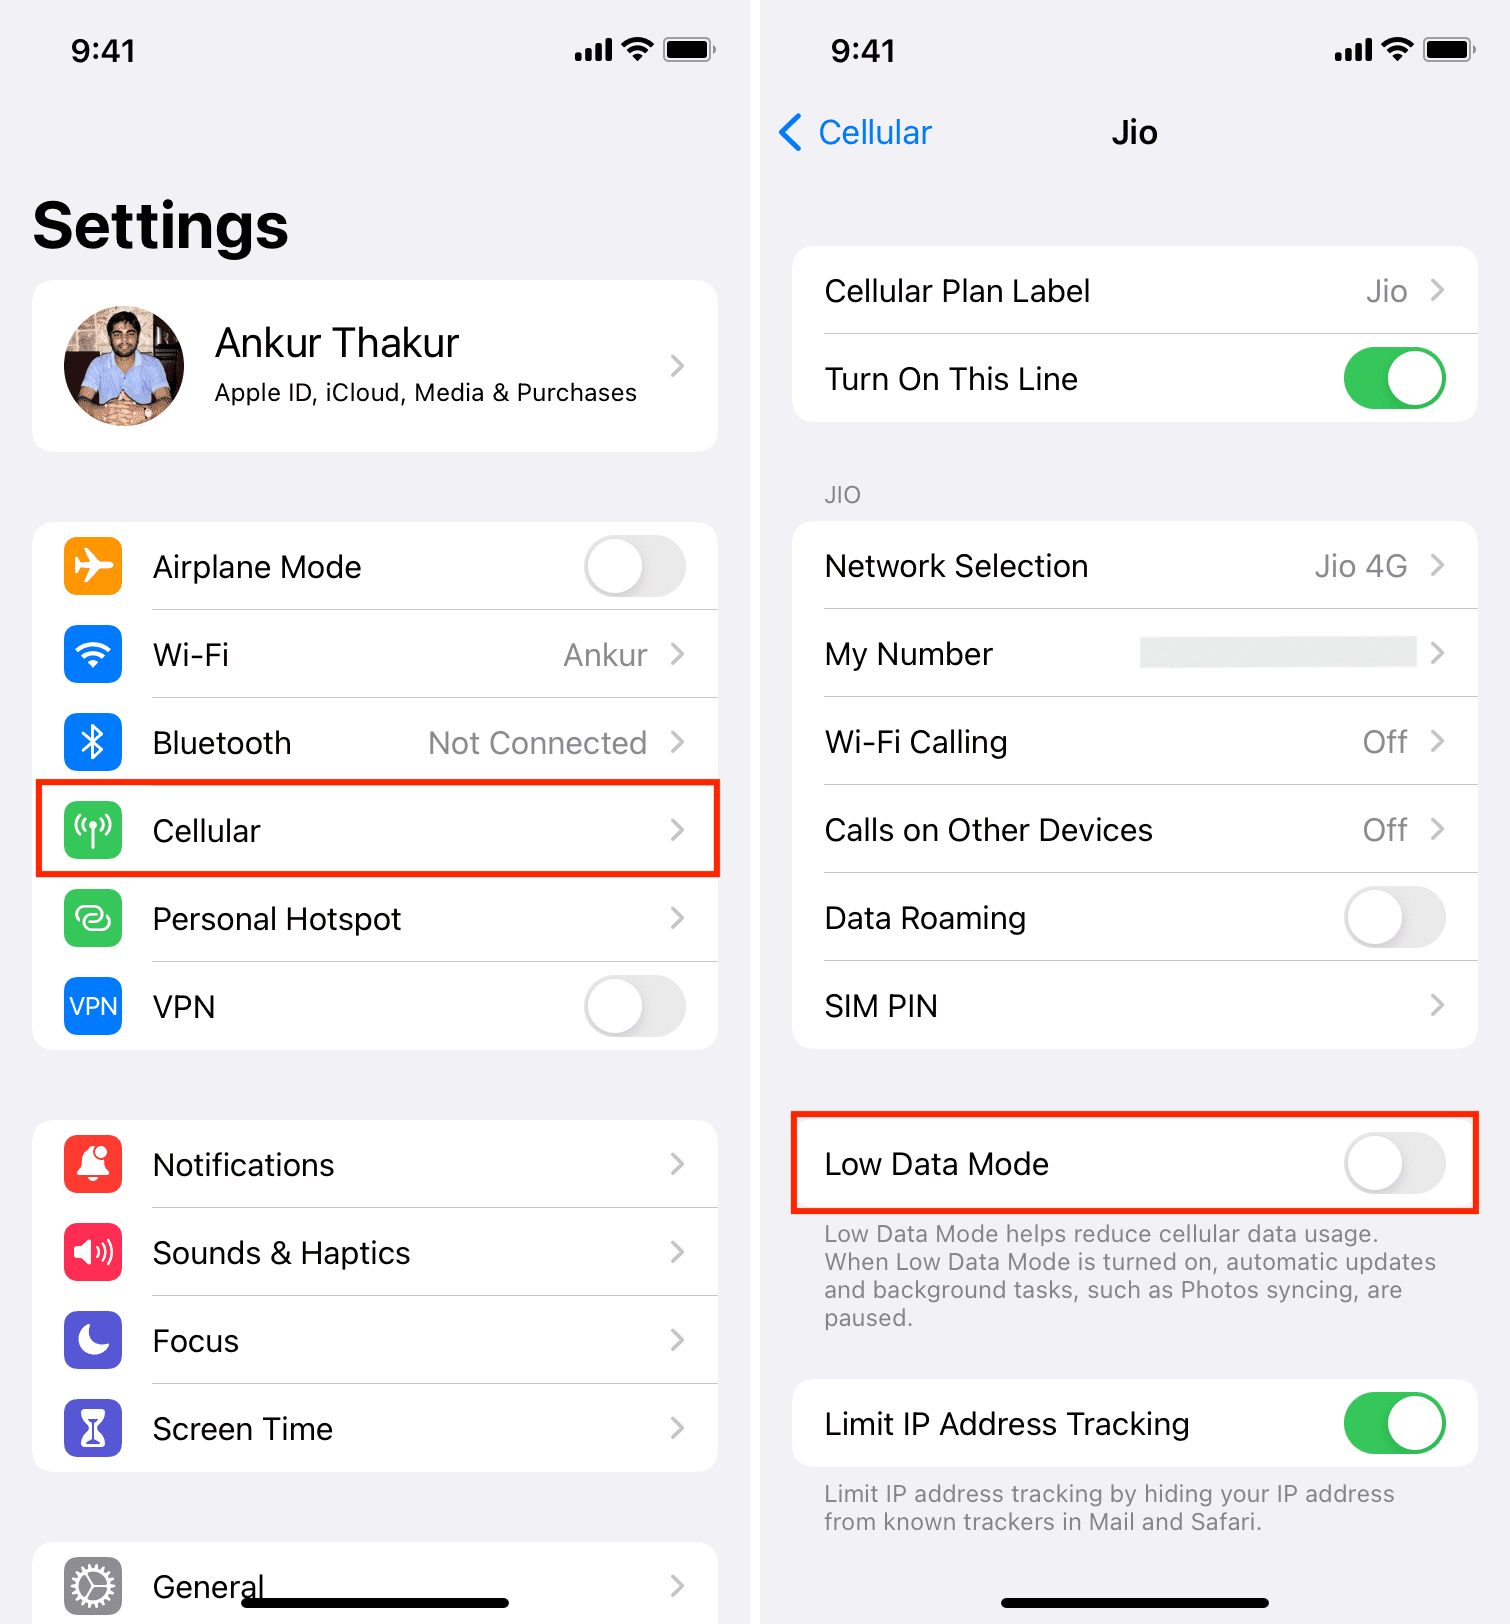 Turn off Low Data Mode in iPhone Settings to fix widgets not working issue